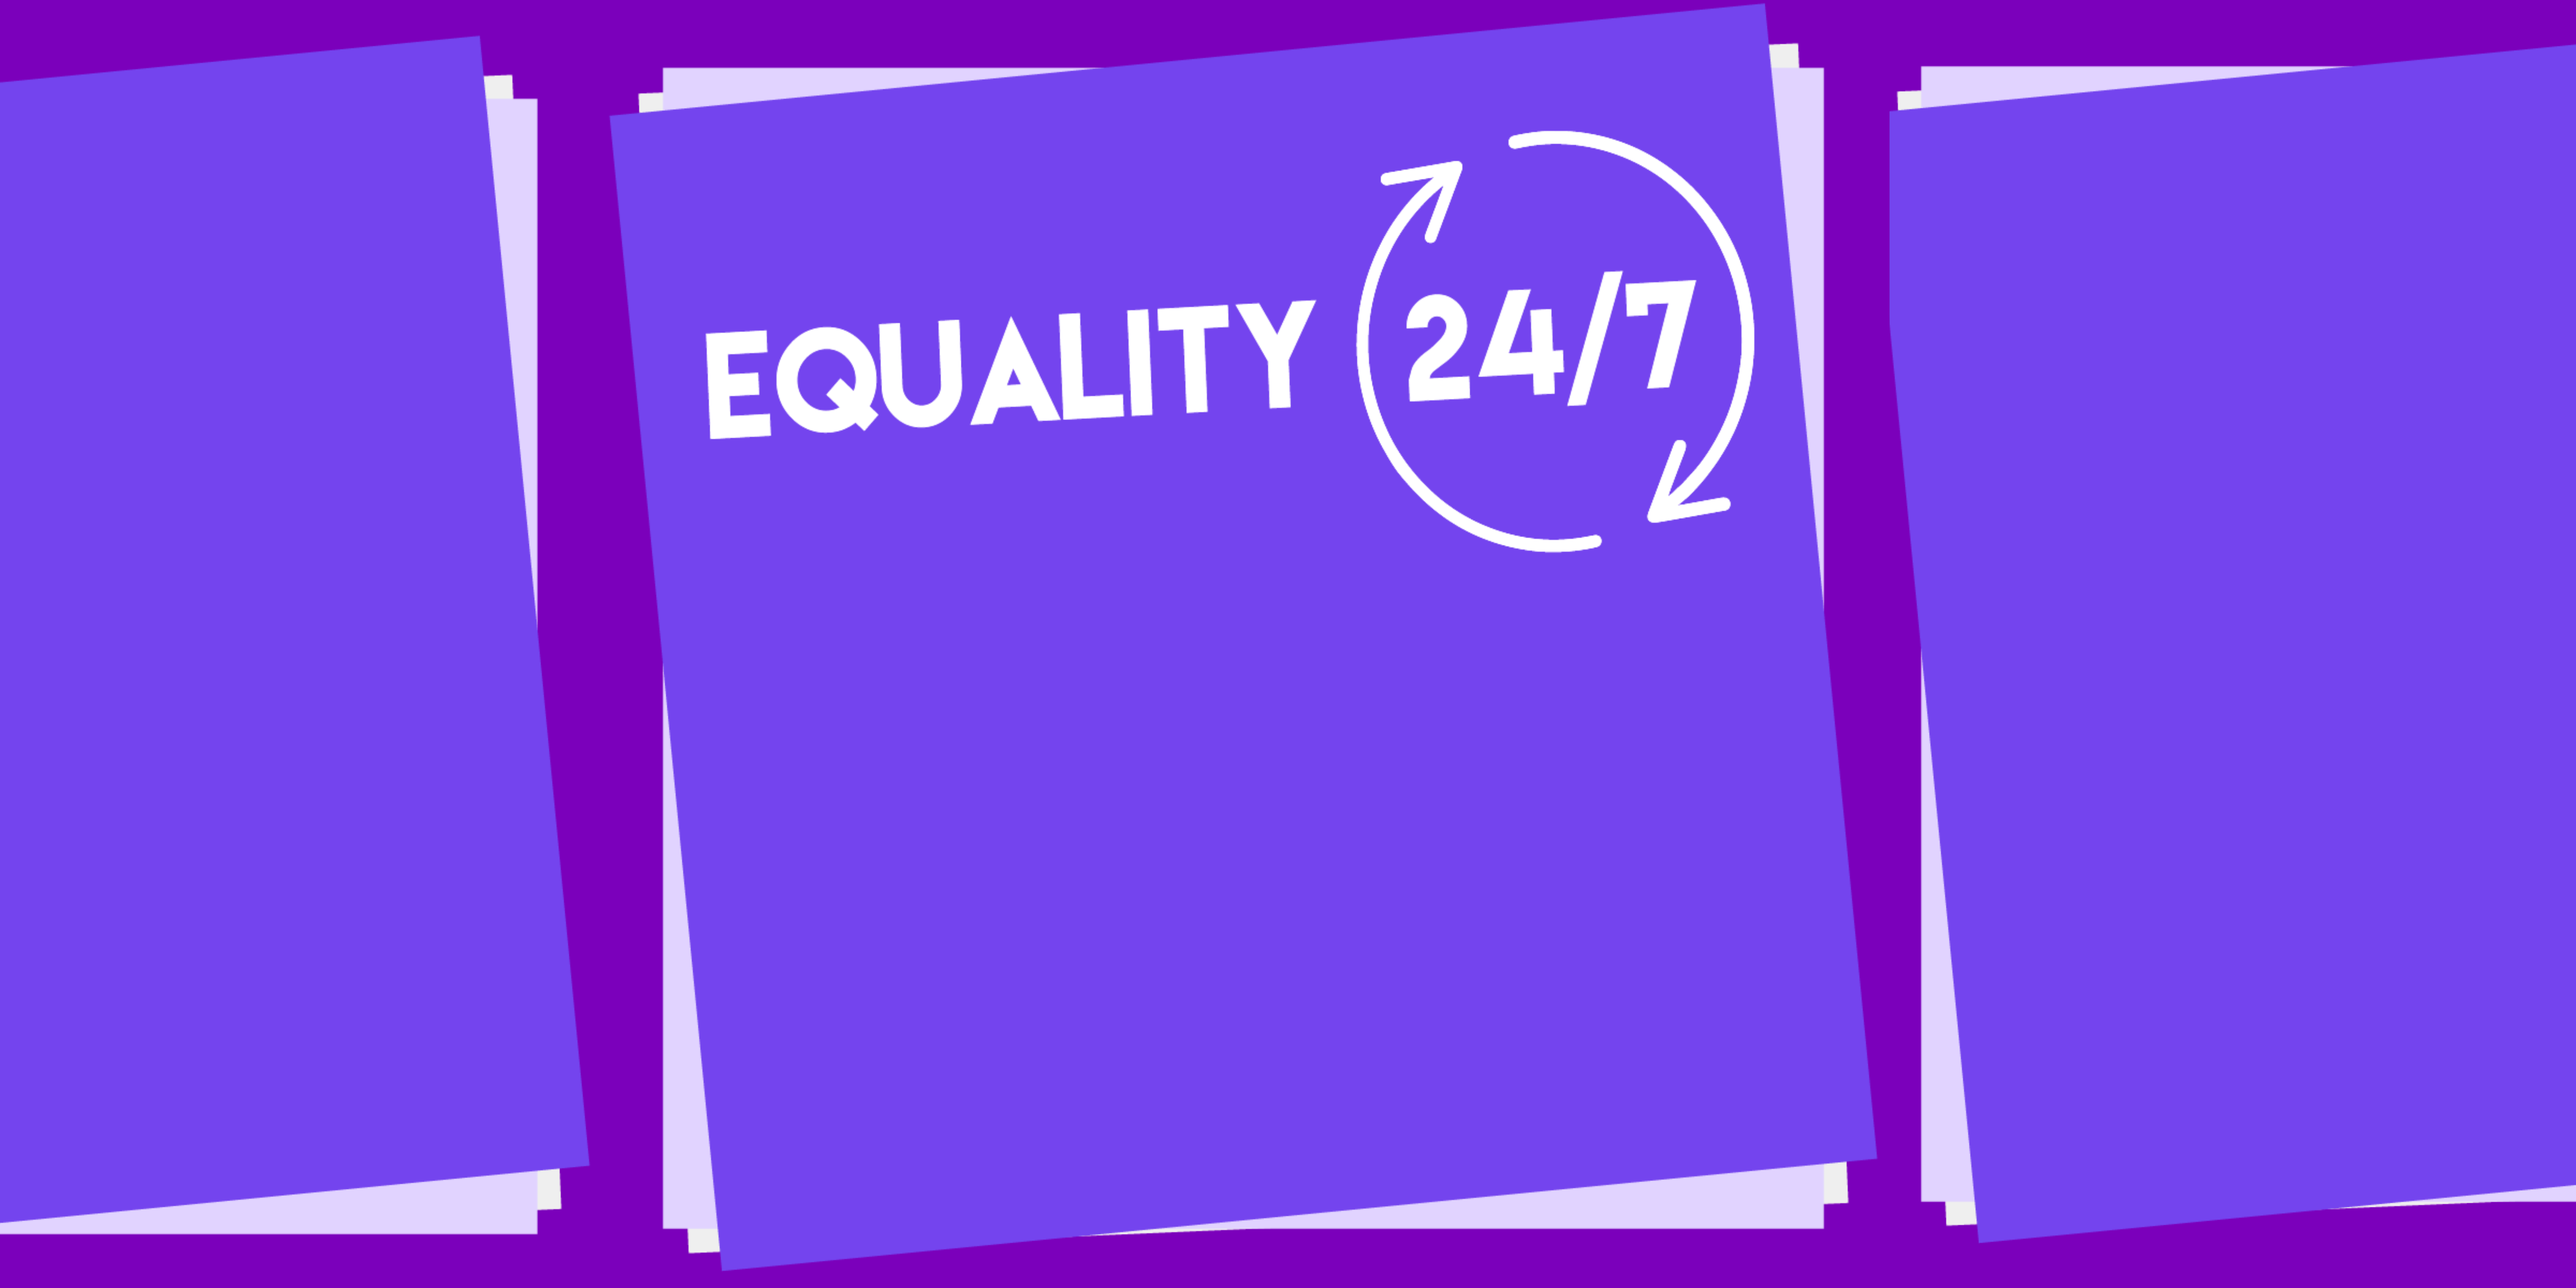 "Equality 24/7" written on purple sheets